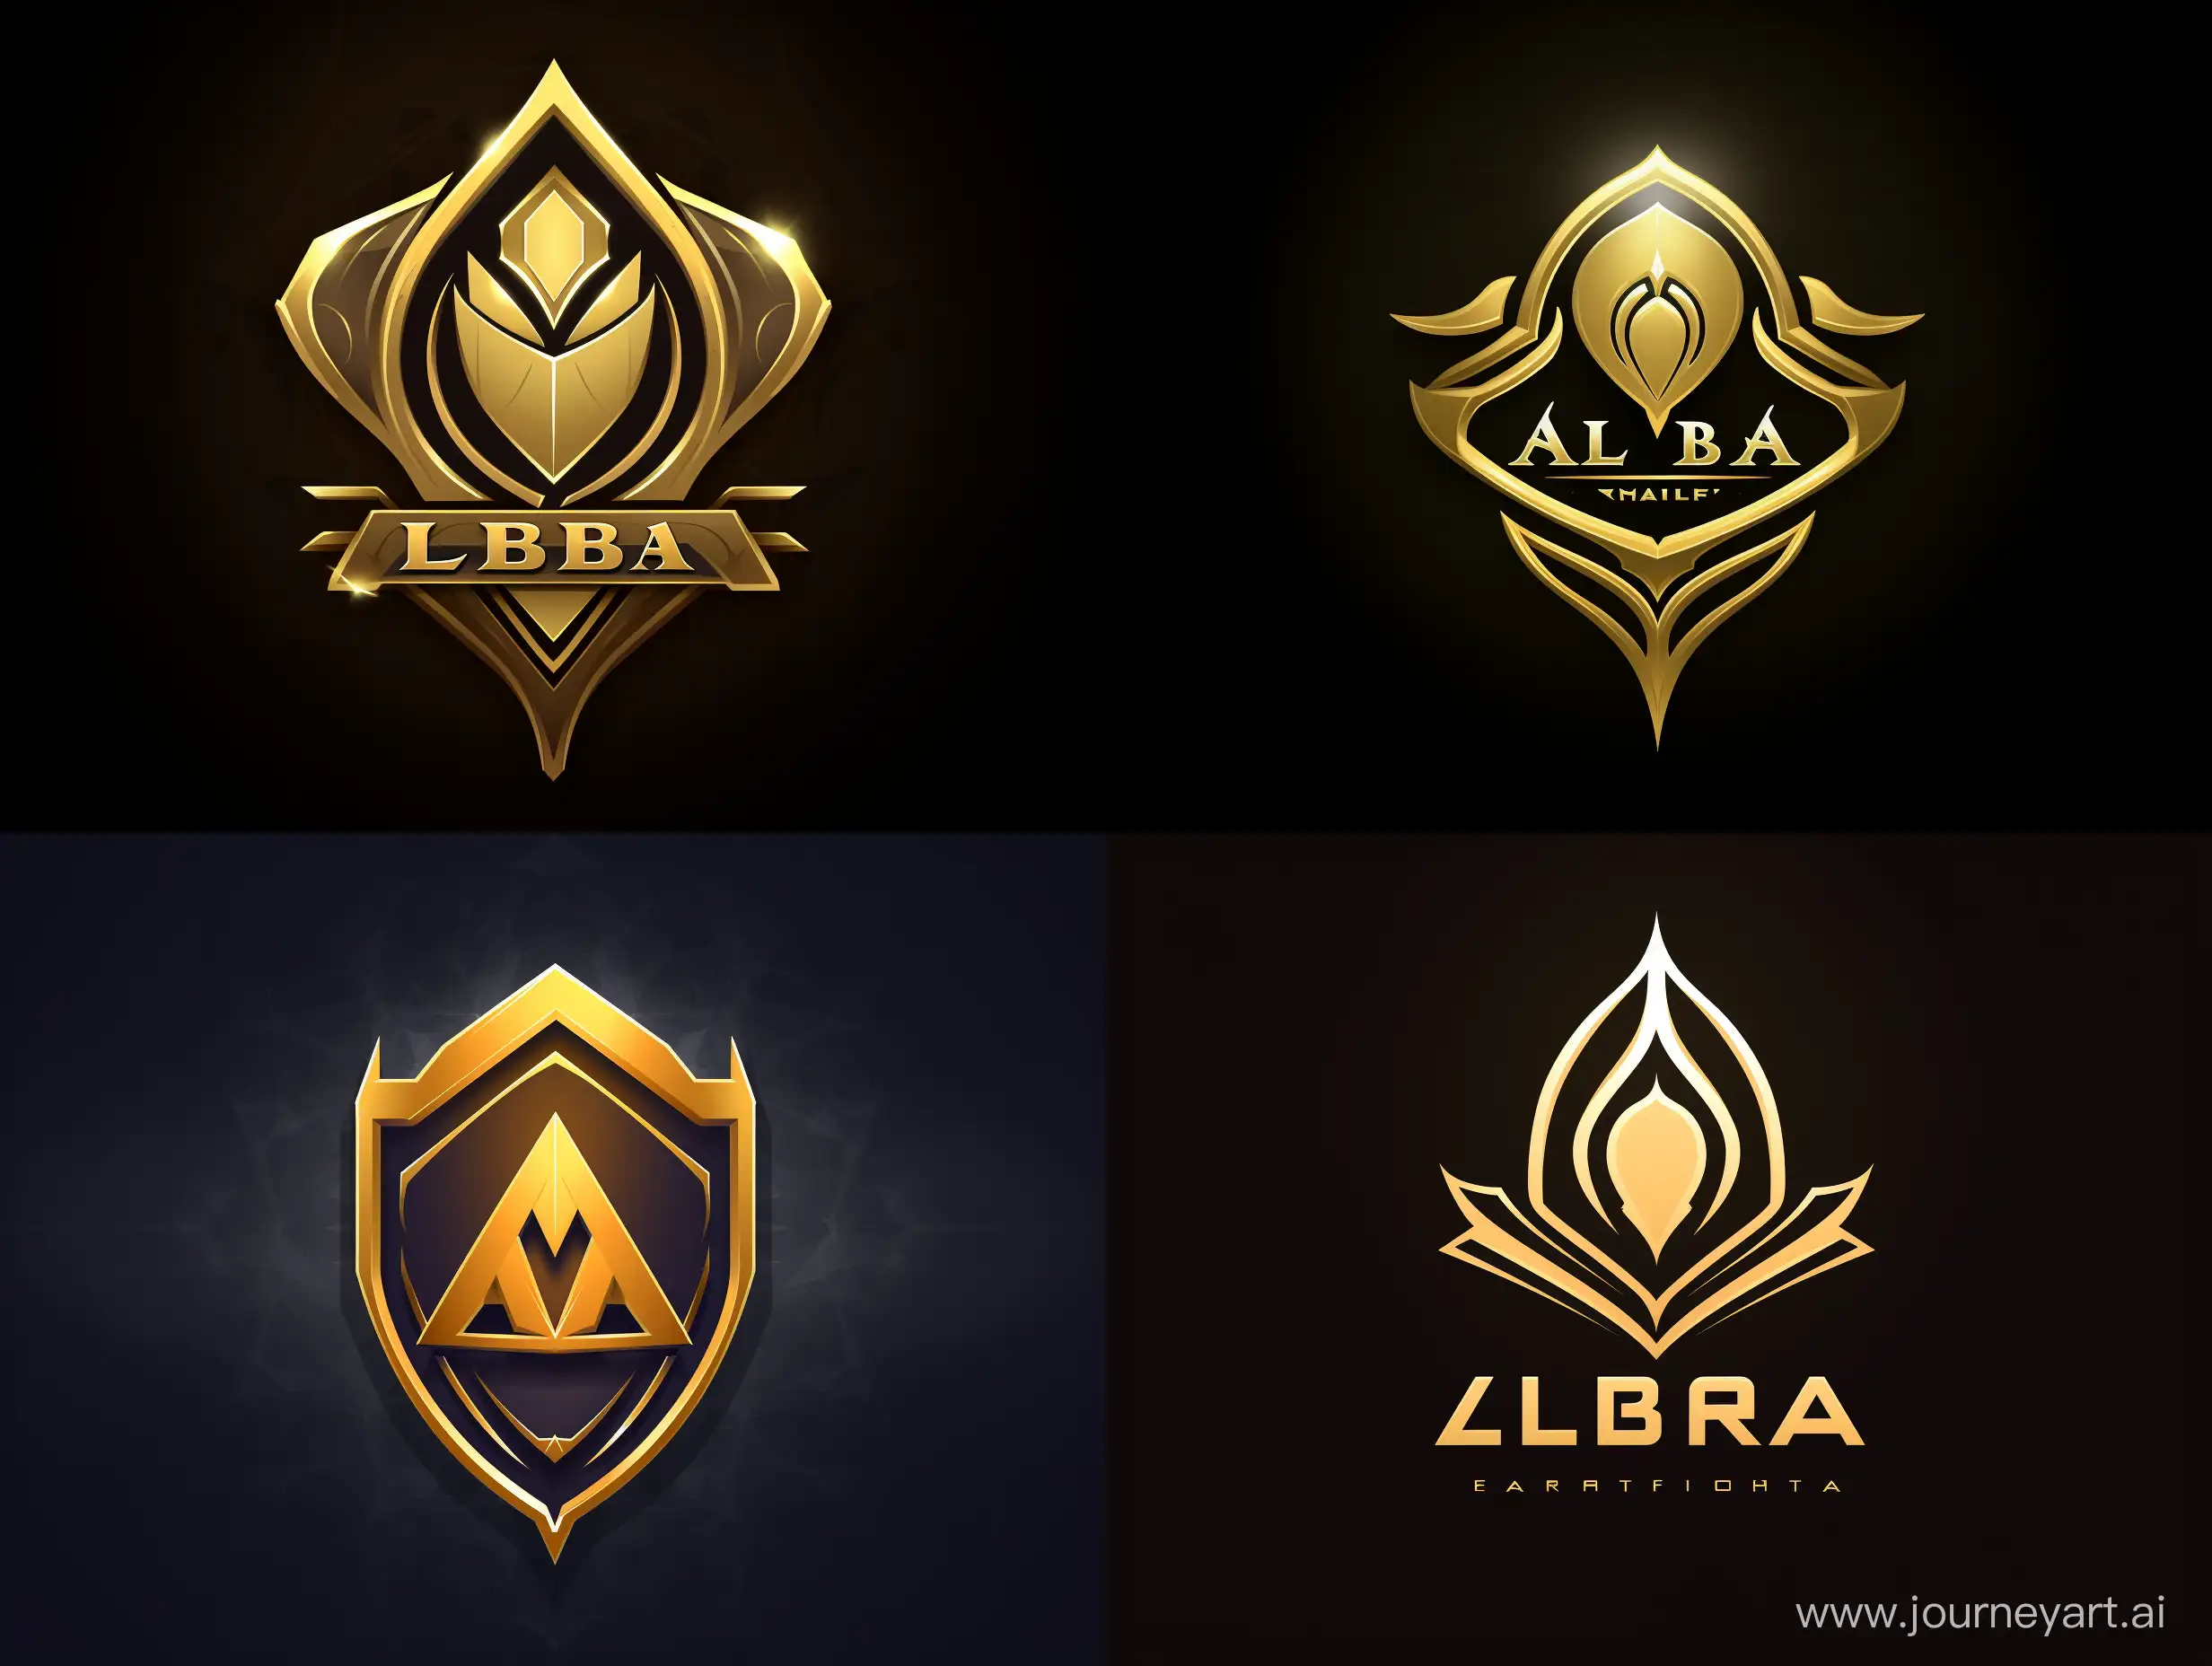 Design a logo for the eSport team 'Alba Esport' with a touch of Islamic aesthetics, keeping it simple and modern. Emphasize the use of the word 'Alba' as the primary element. Consider incorporating subtle Islamic elements without excessive detail, maintaining a minimalist and memorable impression. Utilize a color palette that aligns with the theme, perhaps with gentle touches of gold or green. Ensure the design creates a strong identity for the Alba Esport team, reflecting their competitive spirit and commitment to Islamic values